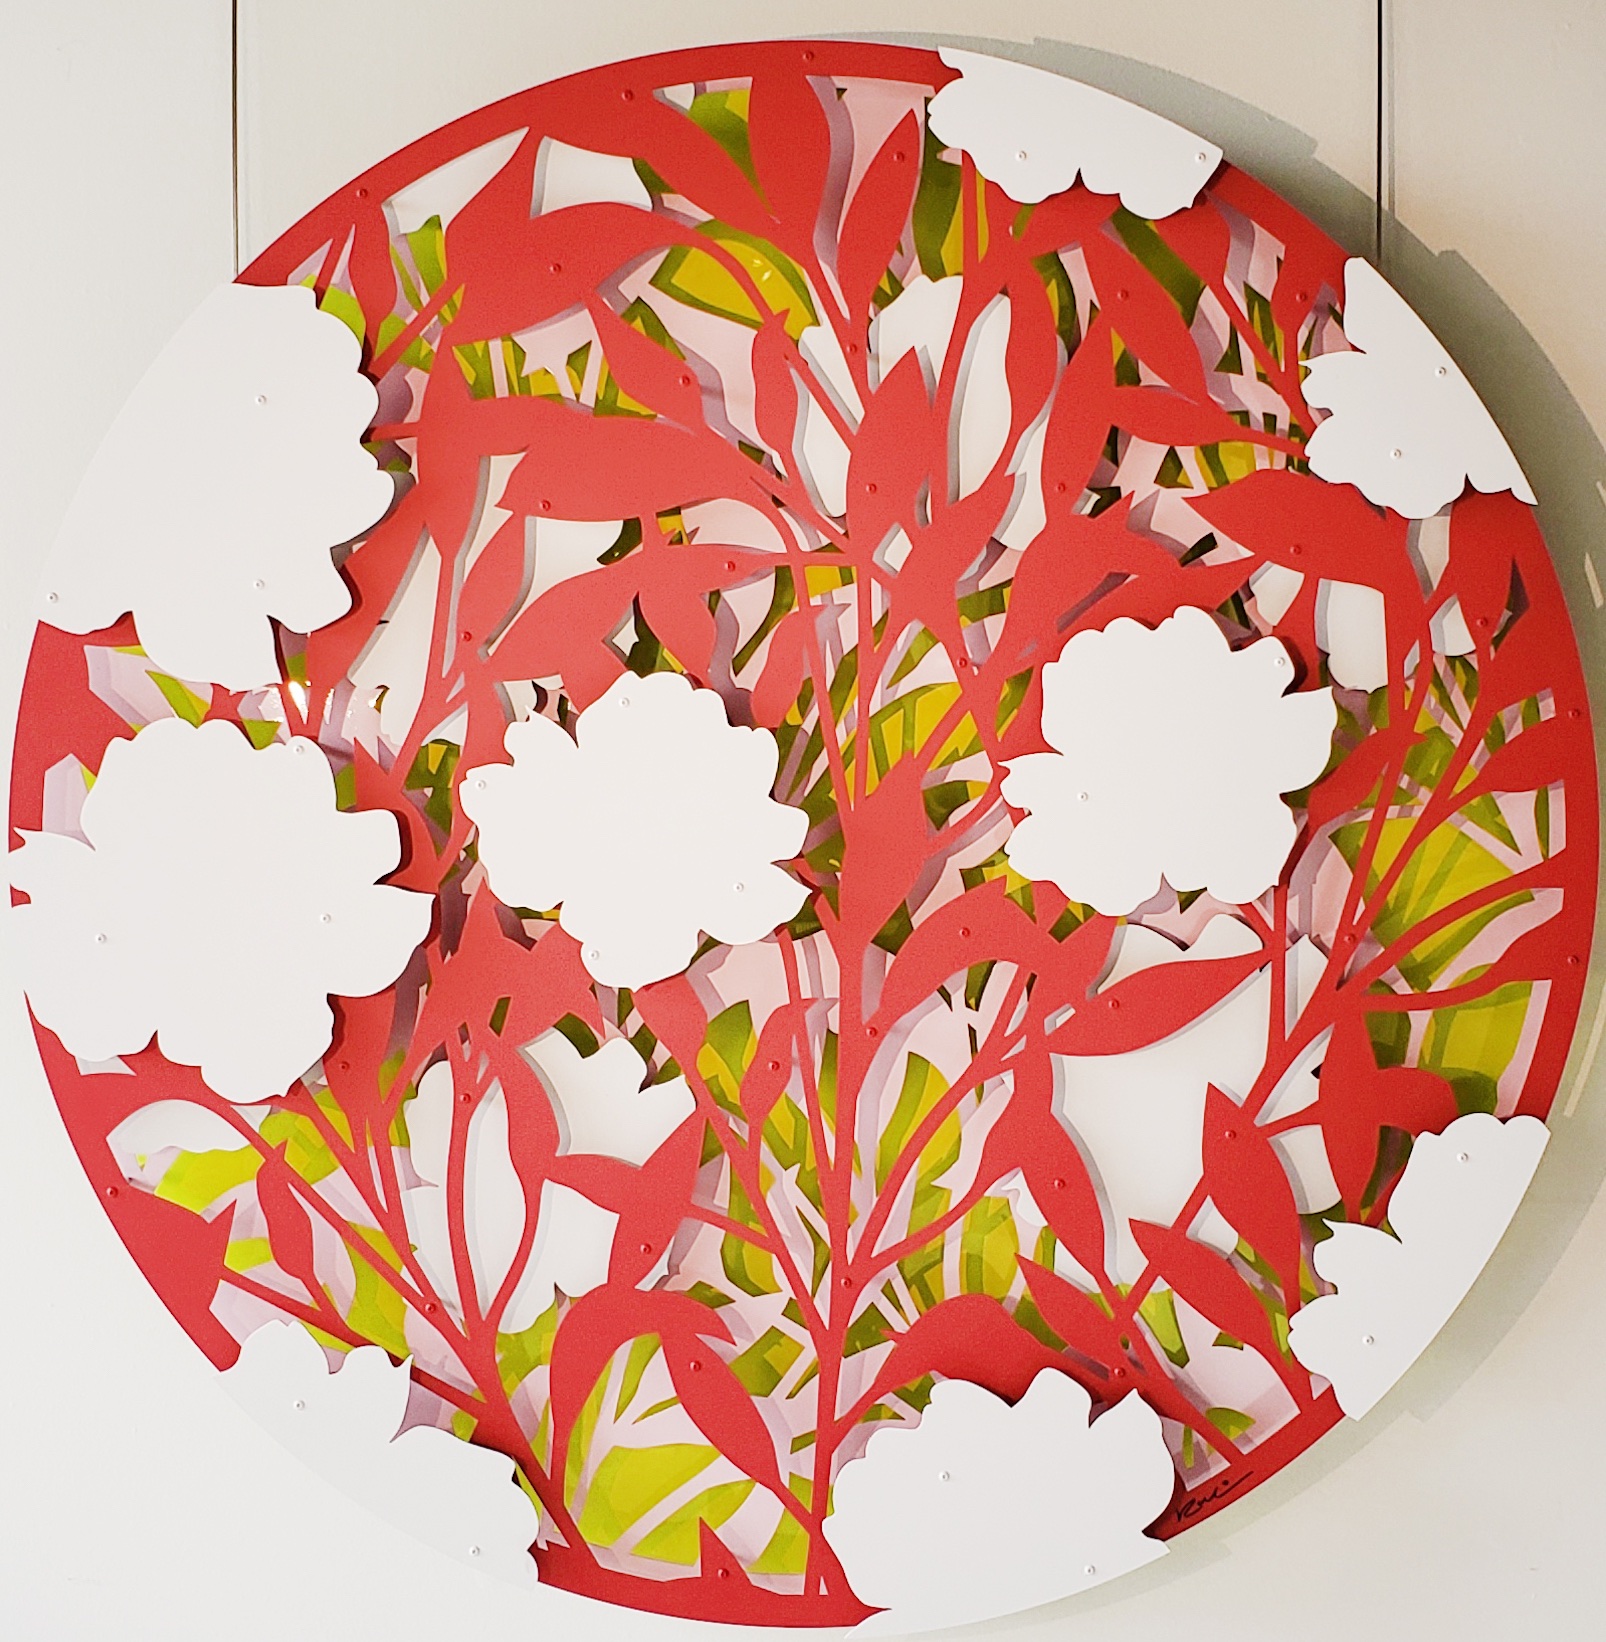 Floral Abstract Circle Red on Candy Pink by Artist Michael Kalish at Markowicz Fine Art - News from Laguna Design Center